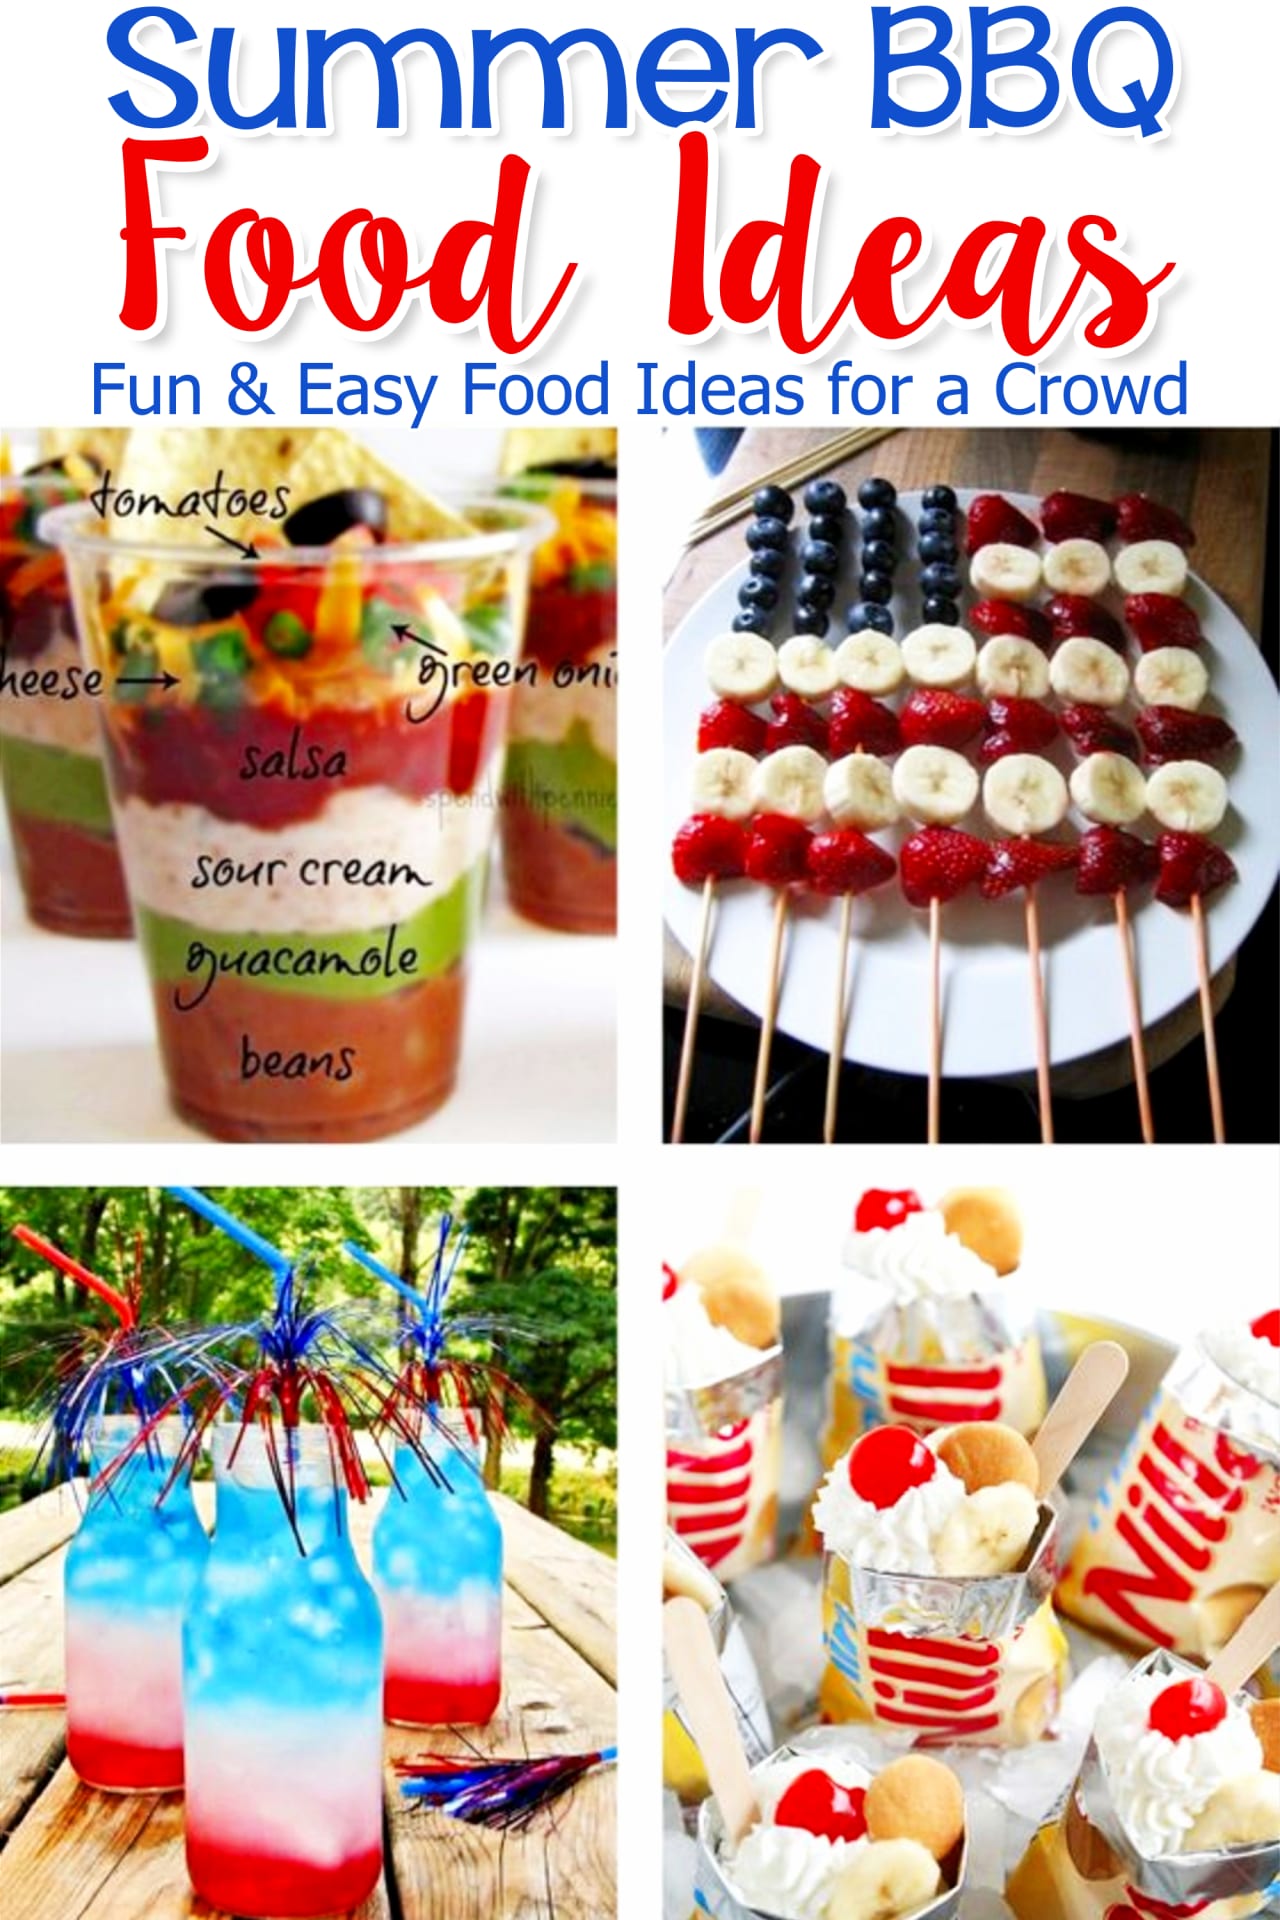 Summer BBQ Party Food Ideas for Entertaining a Crowd! Summer Neighborhood Block Party Food Ideas - simple and easy outdoor summer party food ideas for a crowd